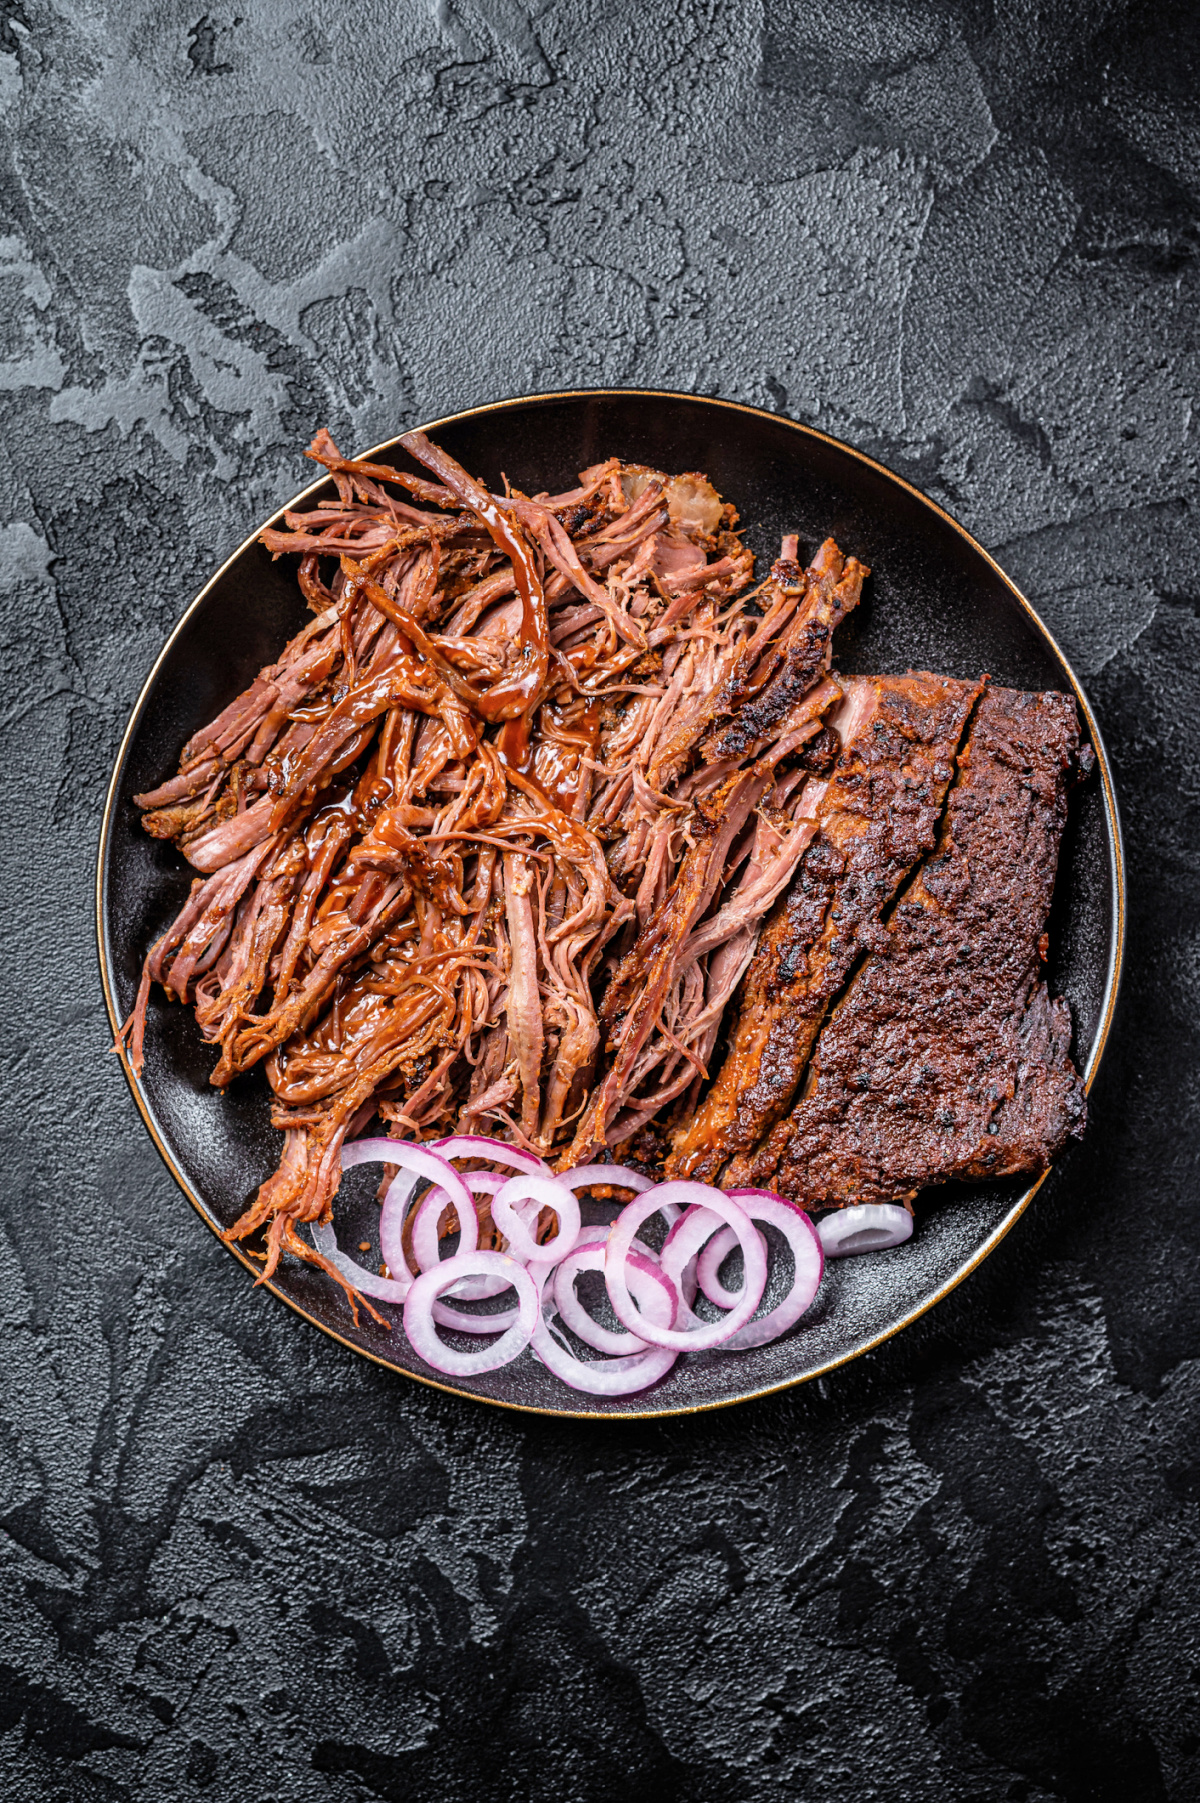 Pulled pork from from the oven and shredded with BBQ sauce